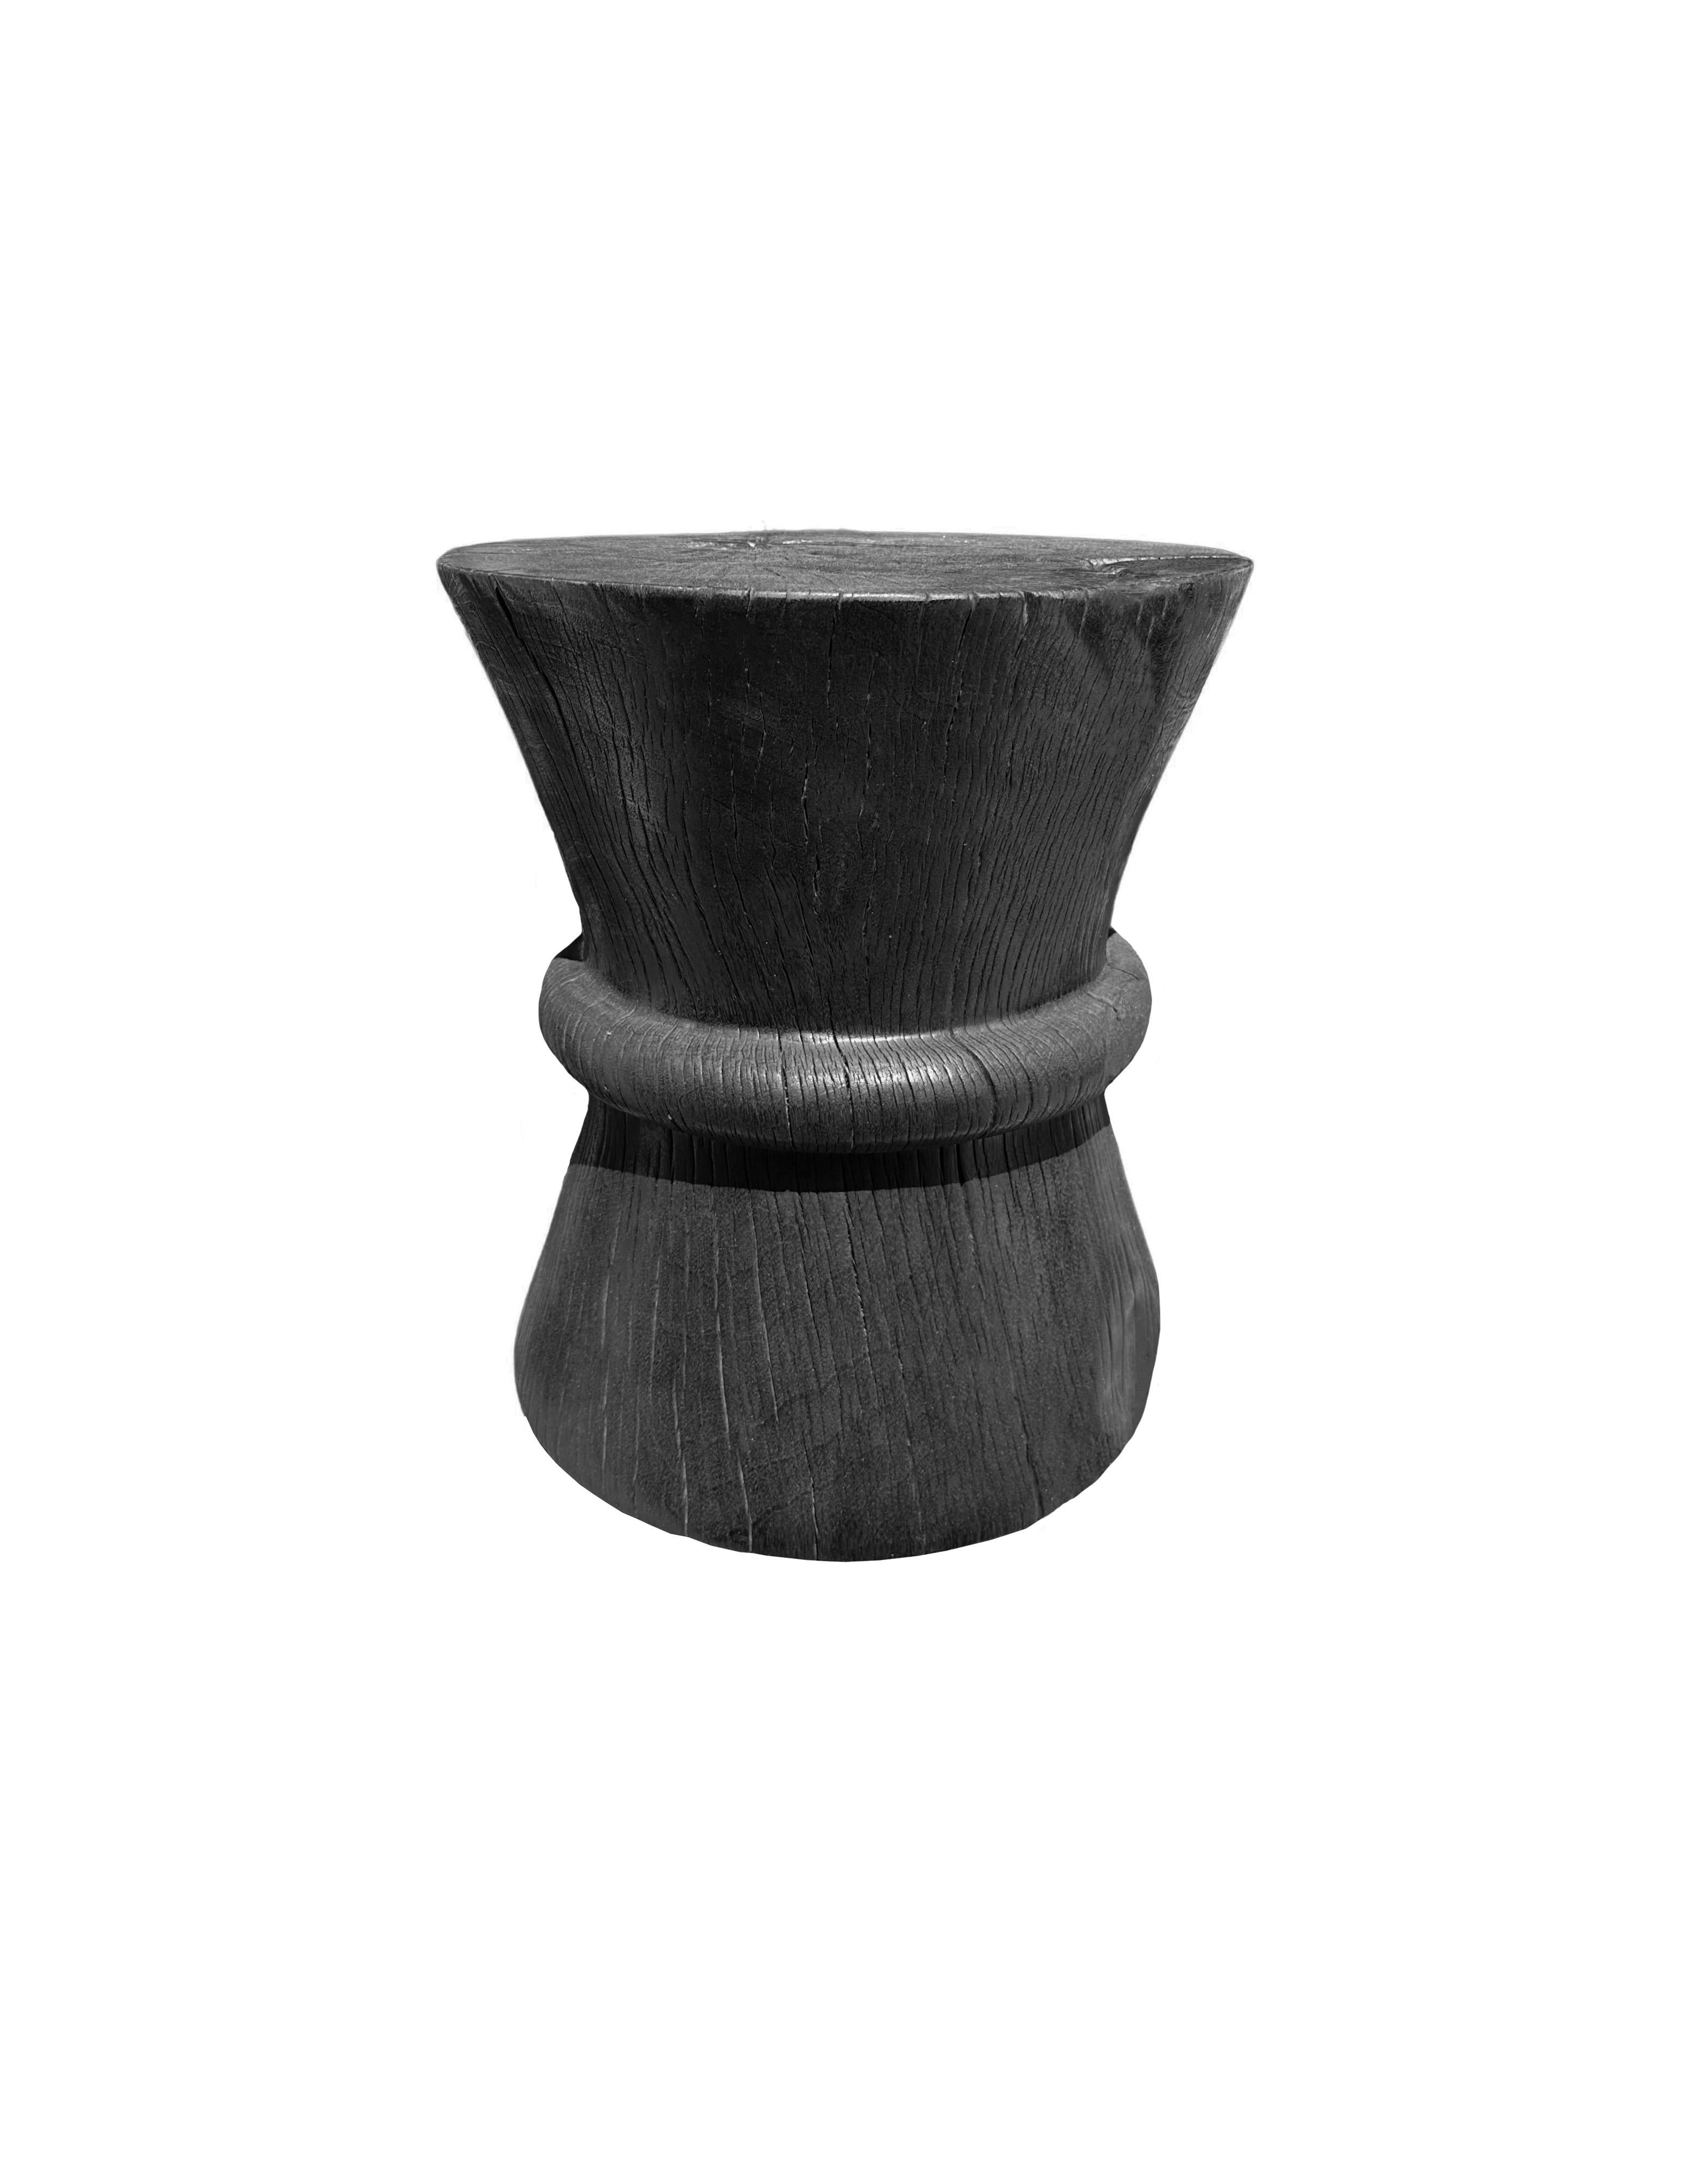 Indonesian Sculptural Solid Tamarind Wood Table, Modern Organic, Burnt Finish For Sale